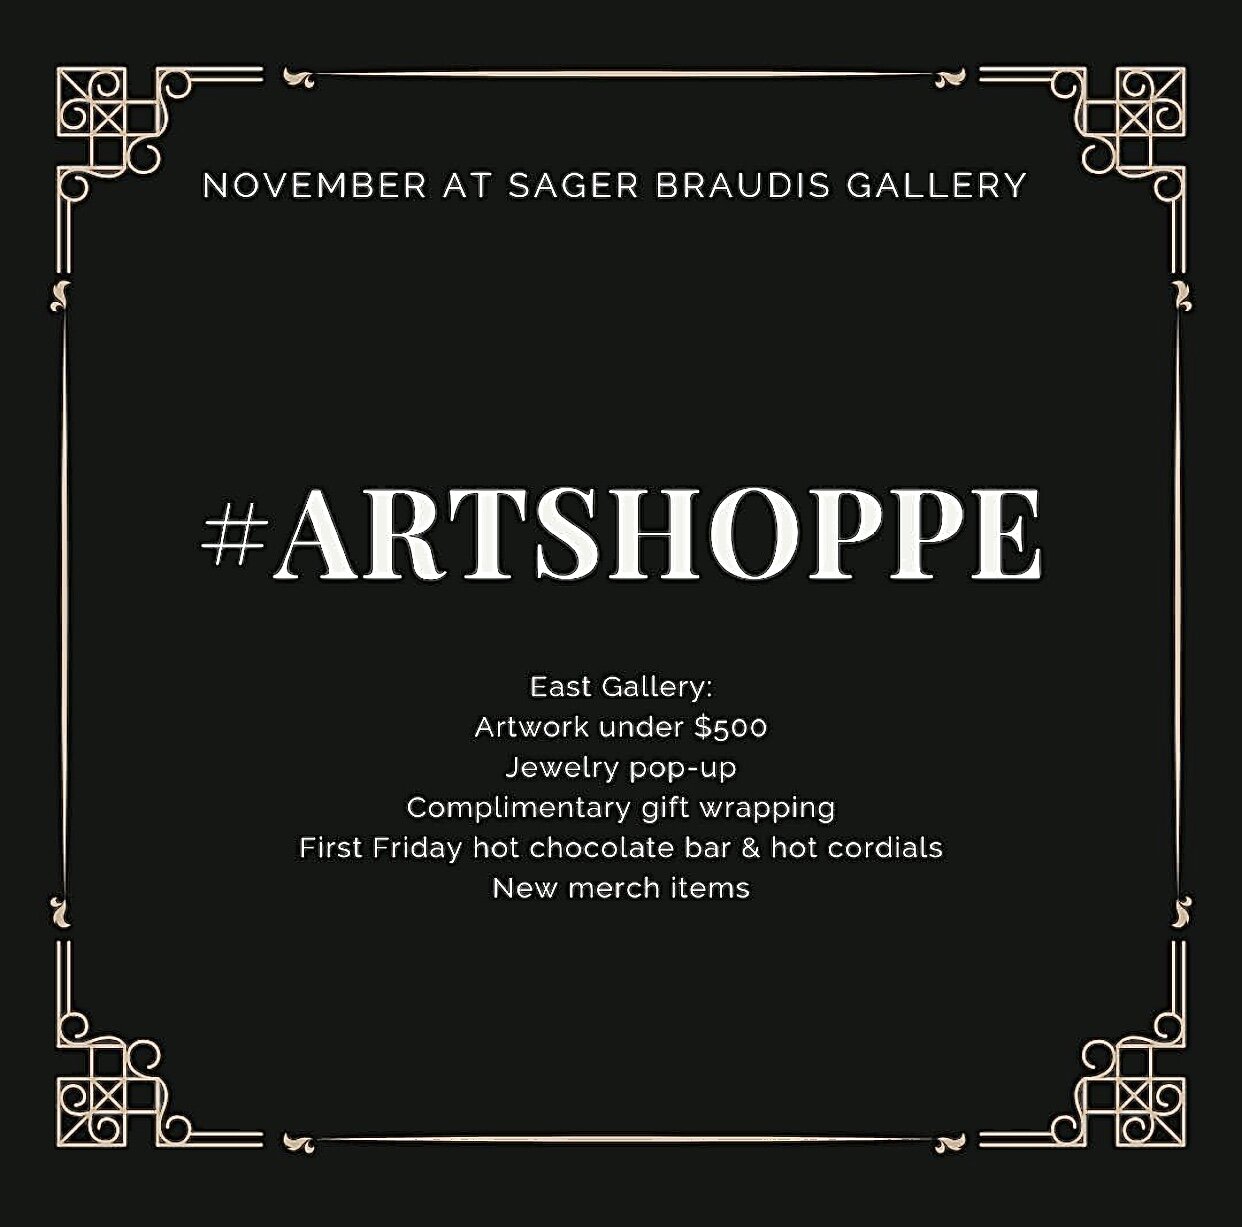  As the holidays approach Sager Braudis’ East Gallery will become an ‘ARTSHOPPE’! Six of my paintings will up for sale as well as other original artworks created by talented artists. Make sure to stop by Sager Braudis, the first Friday of November an